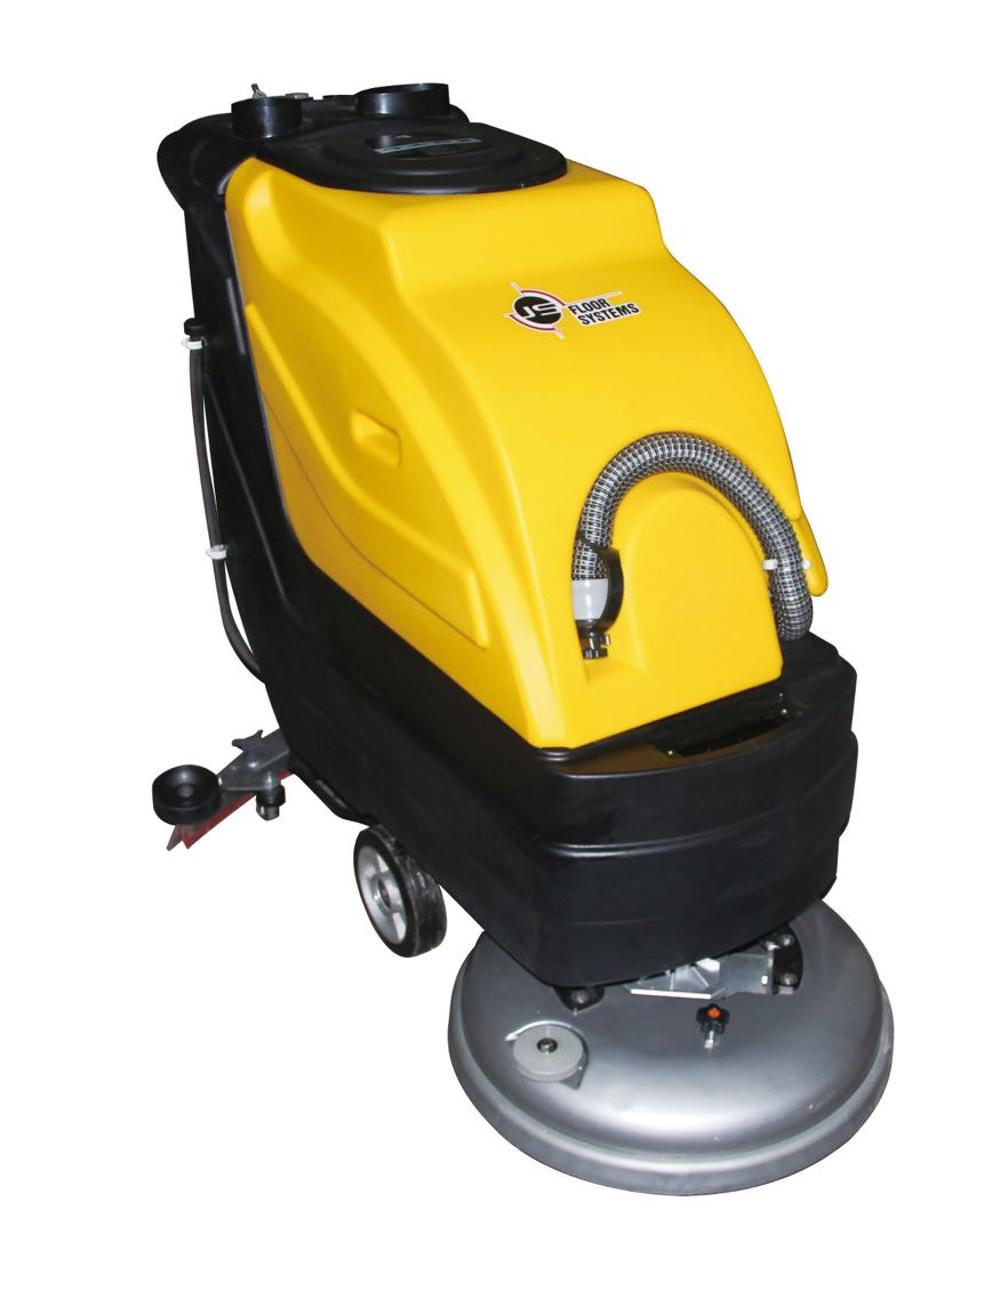 HTB1jrwZkbZnBKNjSZFhq6A.oXXaiC5-Professional-Cleaning-Machine-Floor-Scrubber-Sweeping